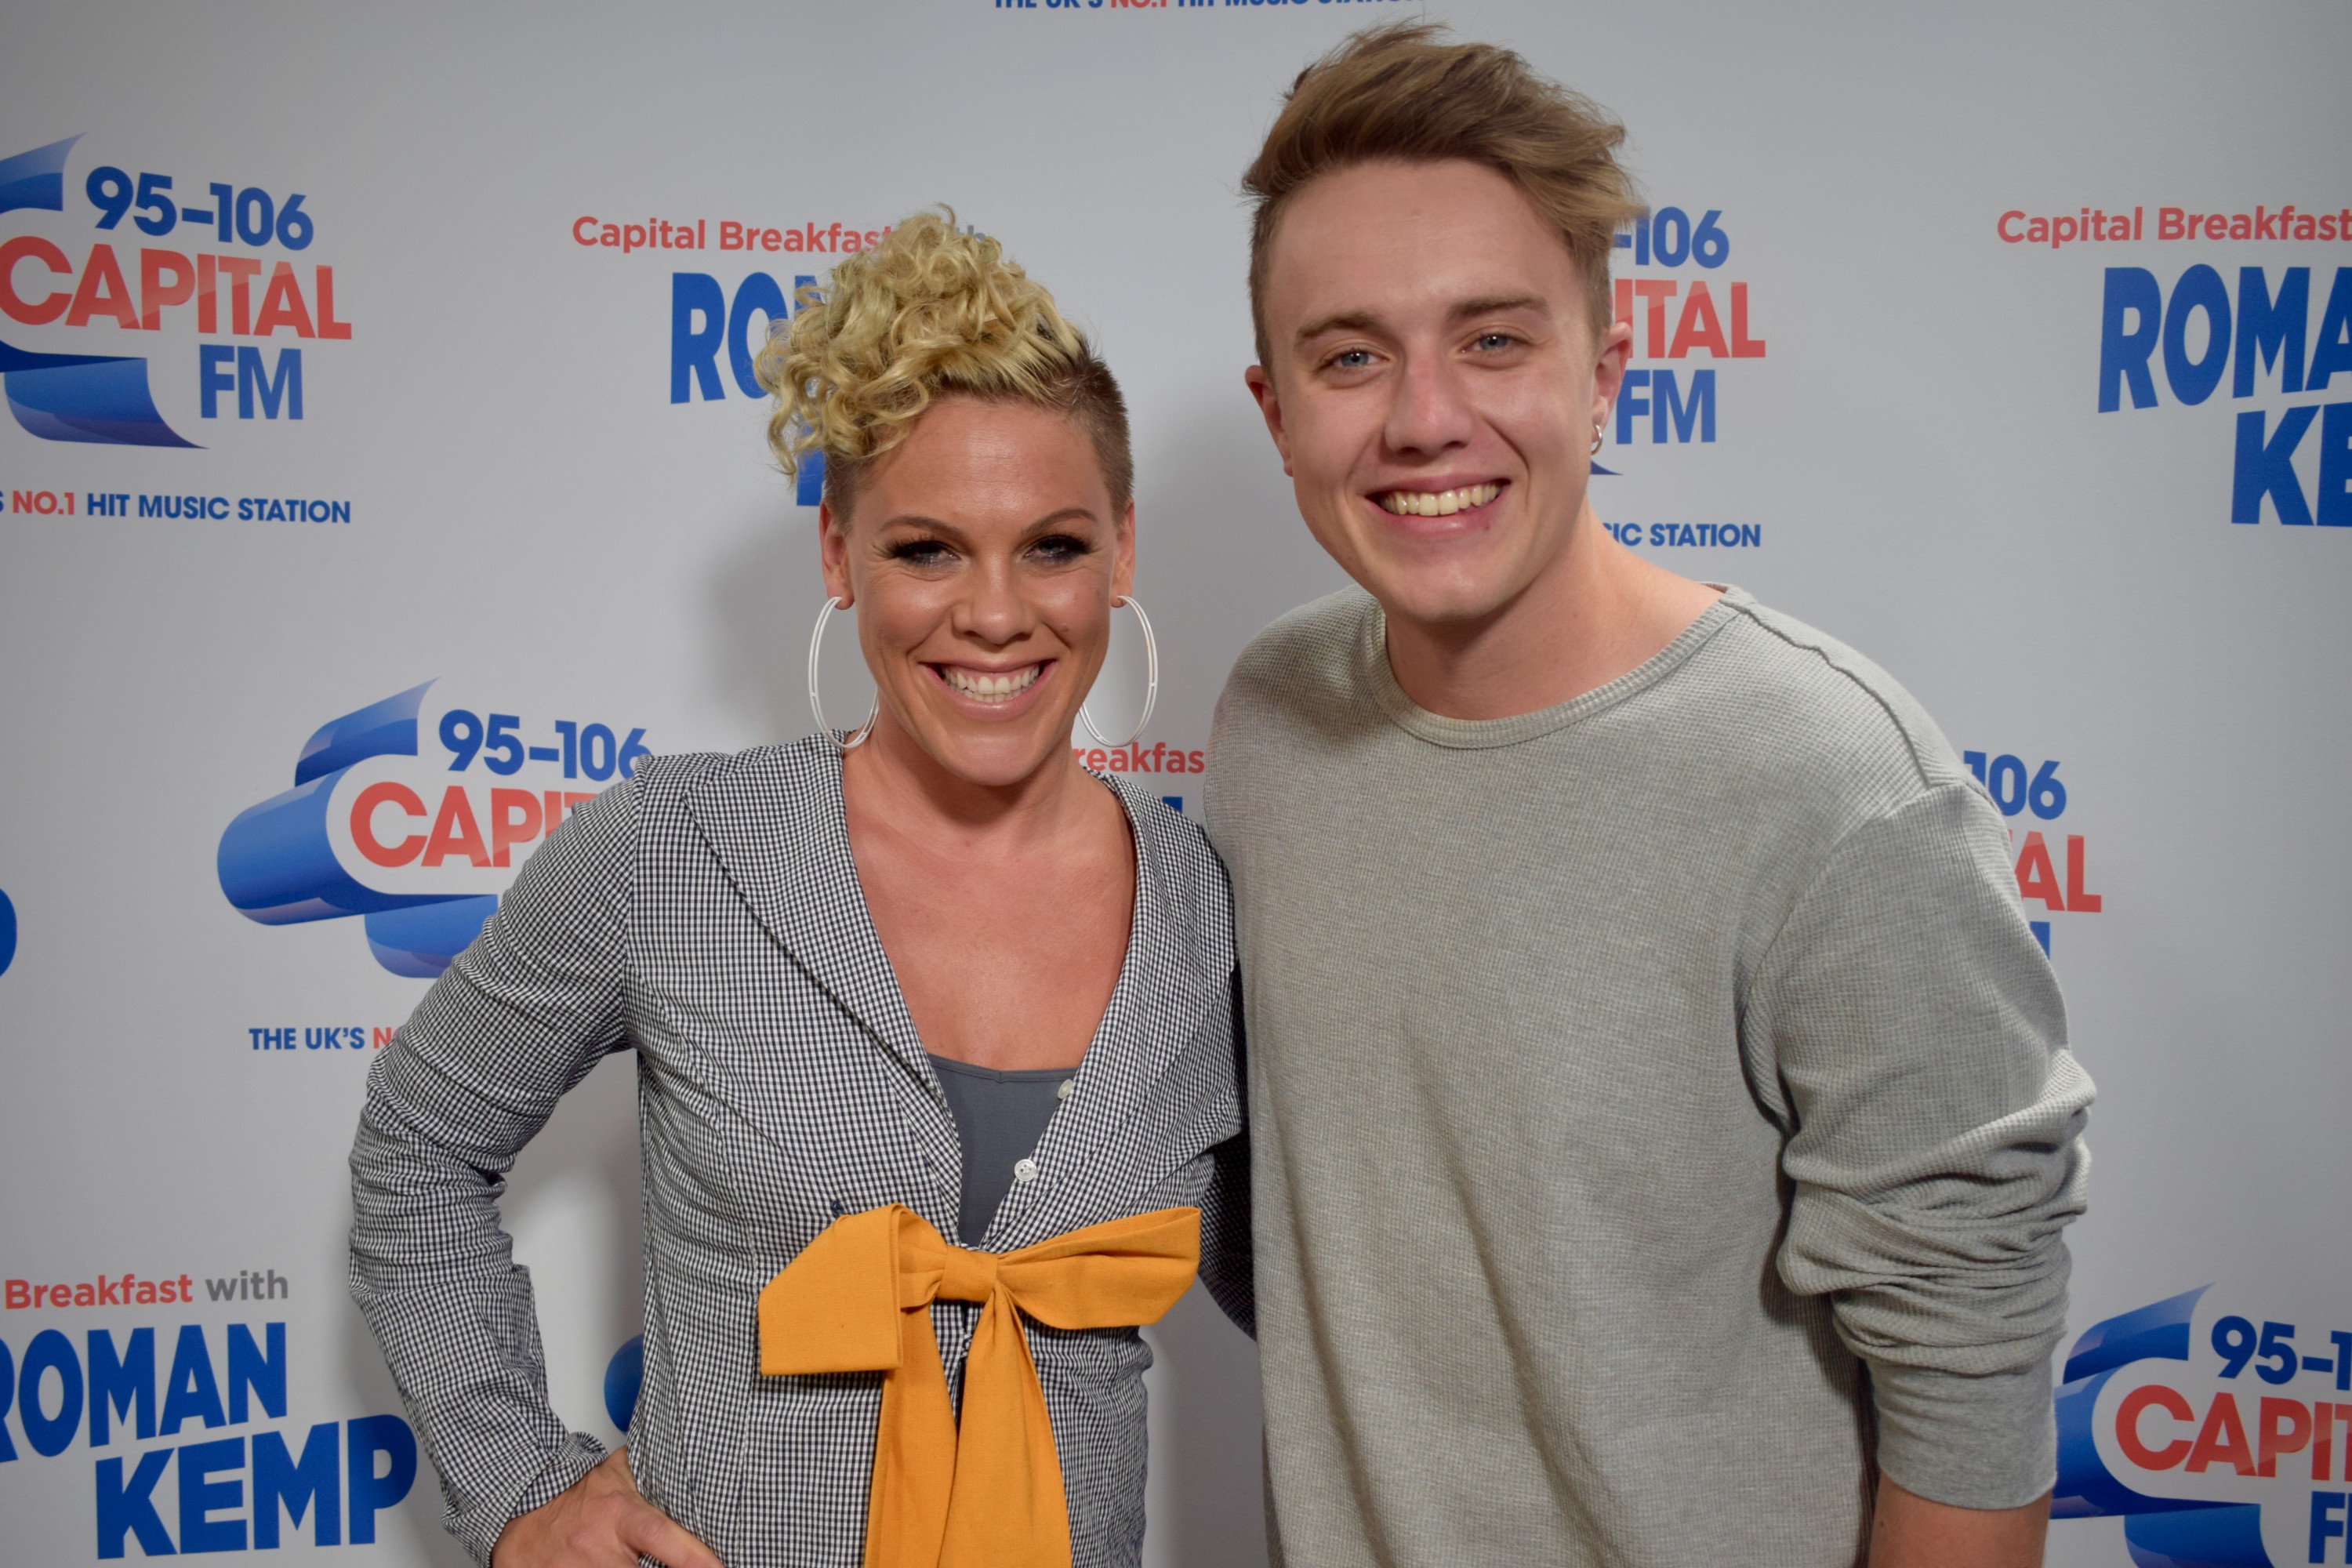 Pink with Capital Breakfast with Roman Kemp